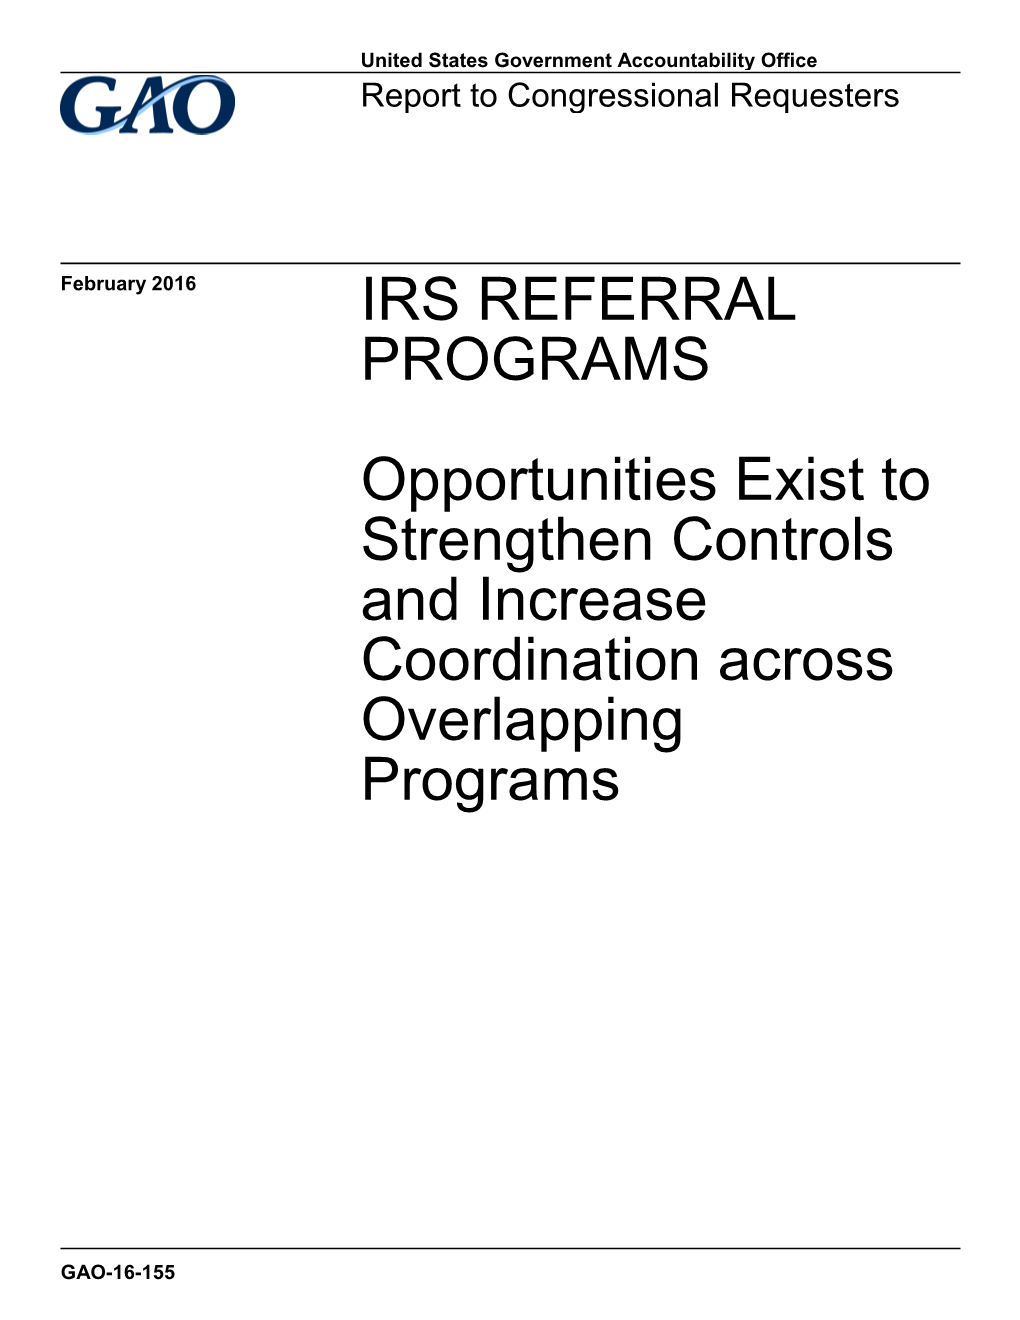 GAO-16-155, IRS Referral Programs